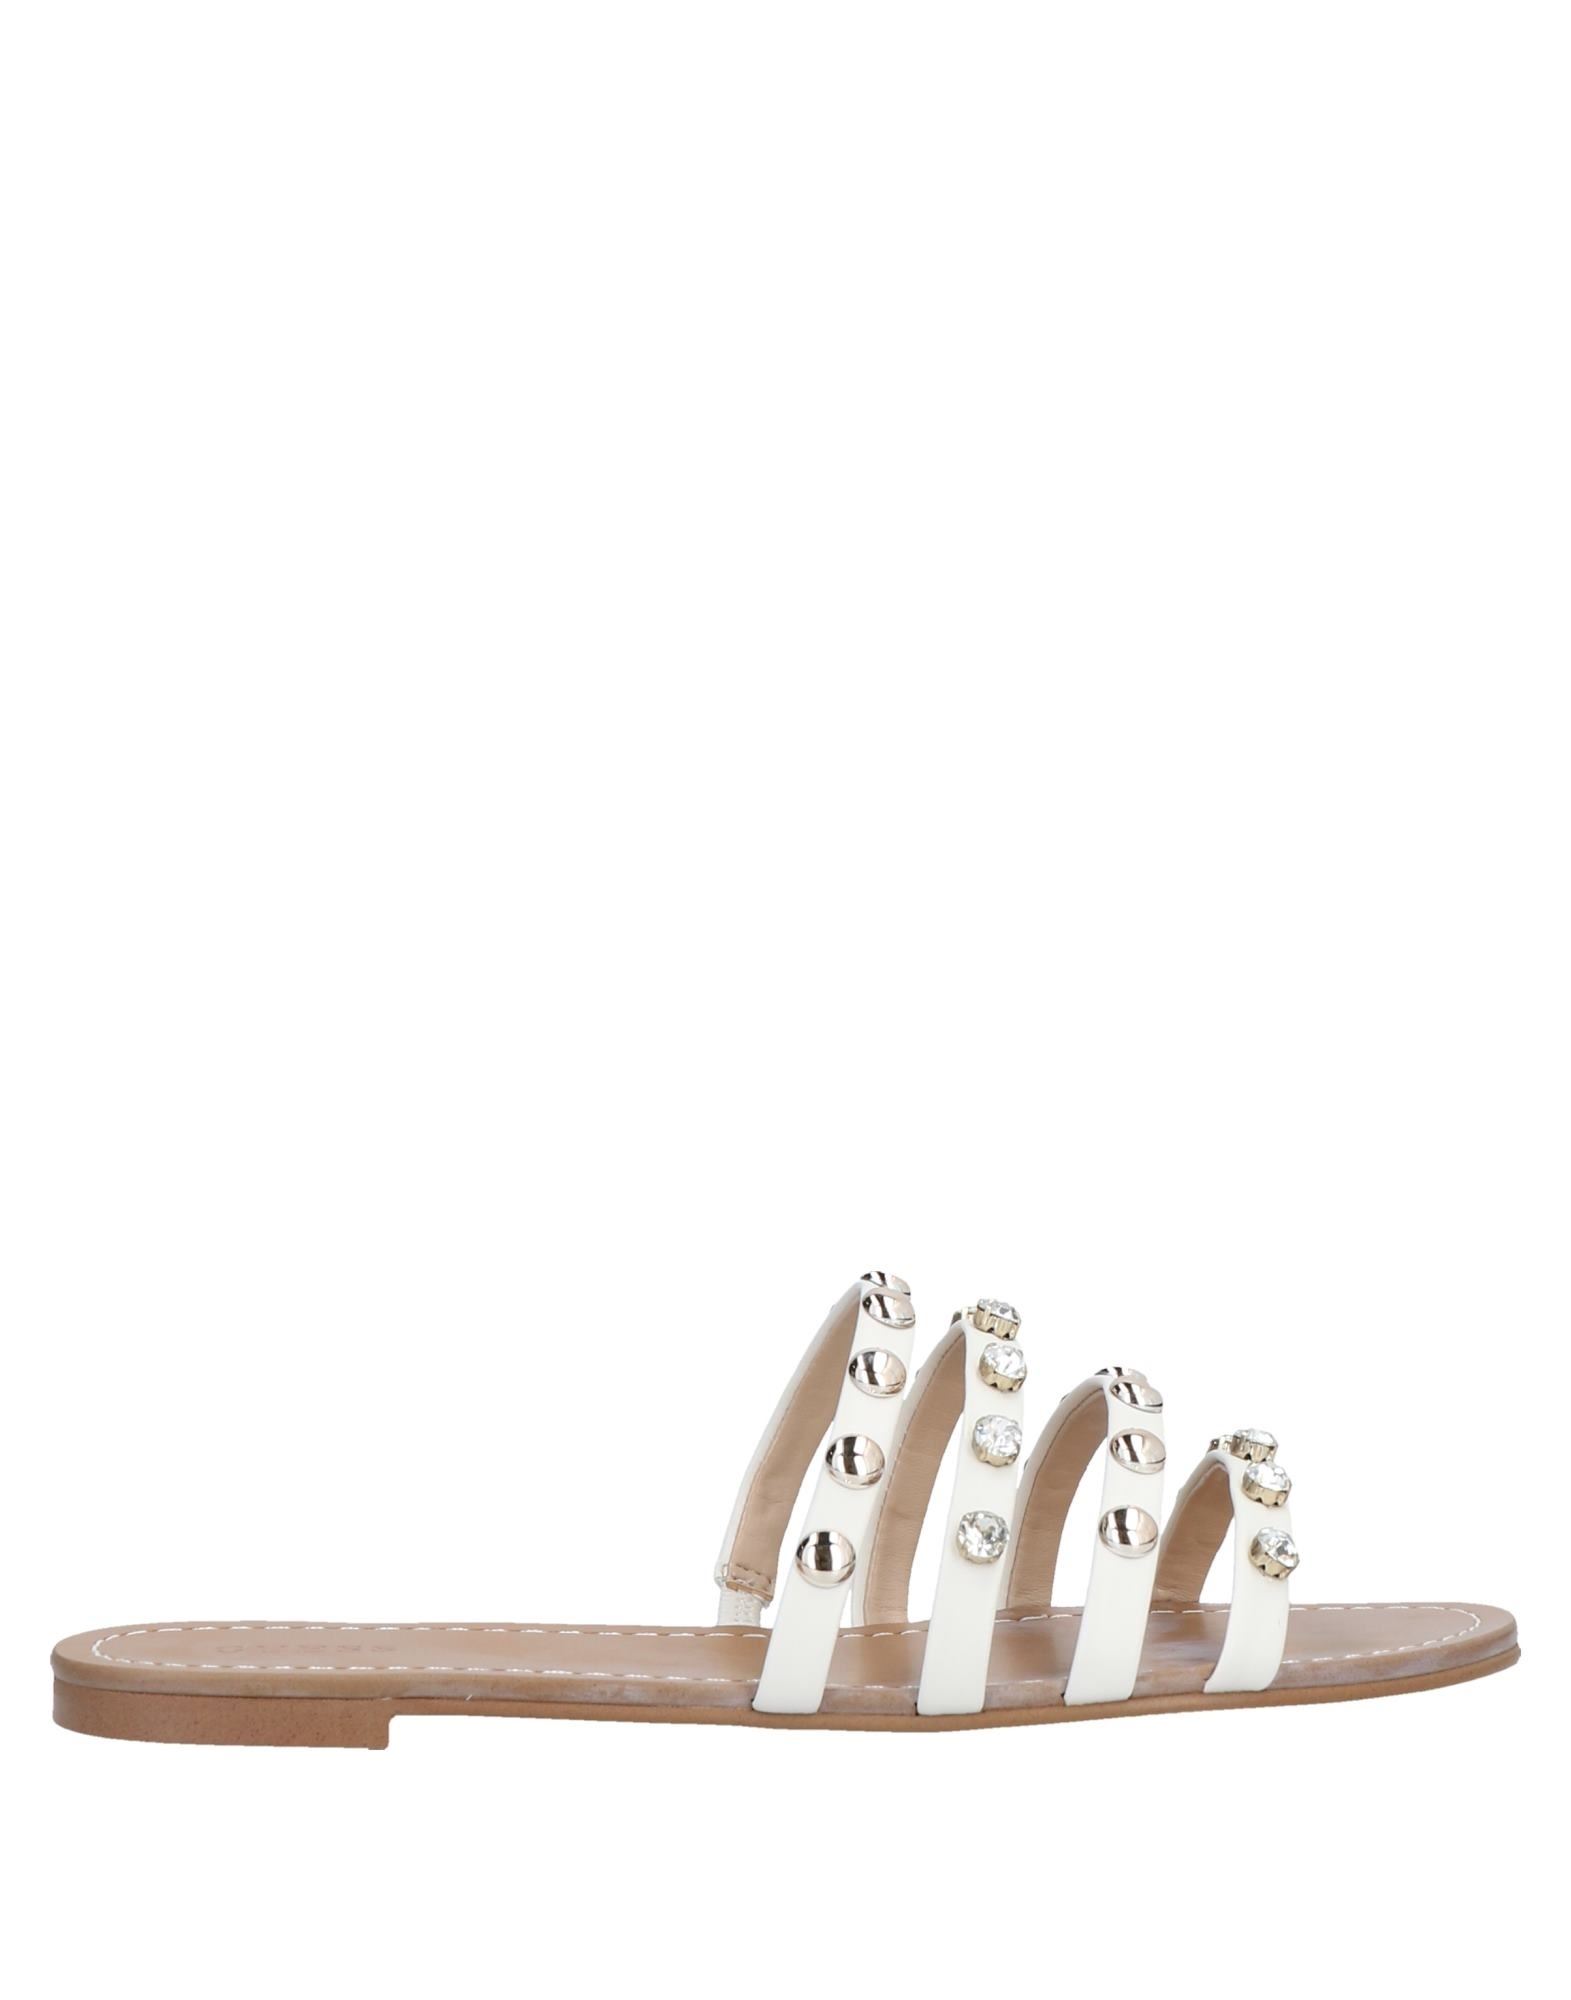 Guess Sandals In Ivory | ModeSens